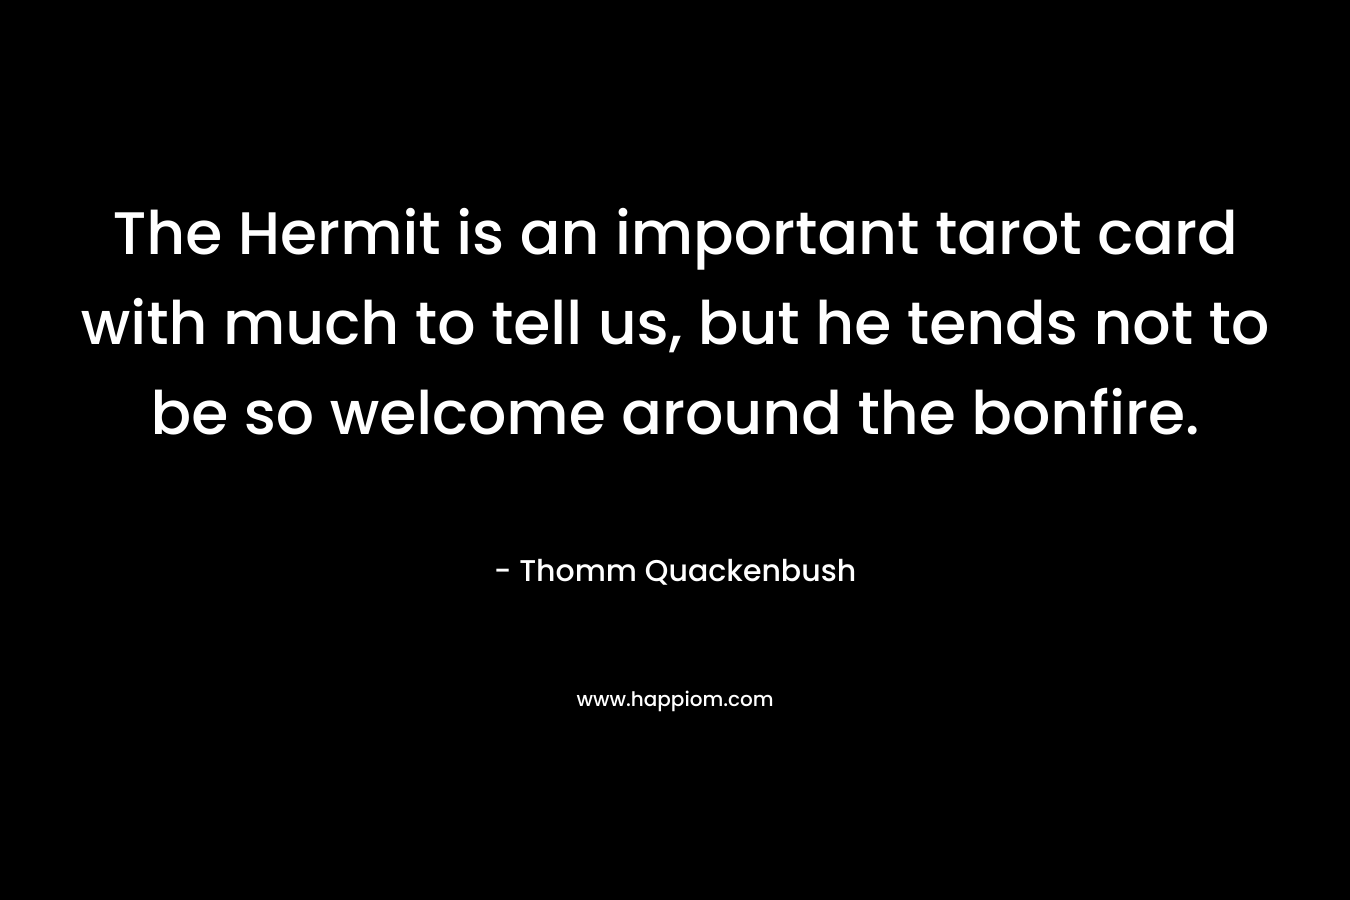 The Hermit is an important tarot card with much to tell us, but he tends not to be so welcome around the bonfire. – Thomm Quackenbush